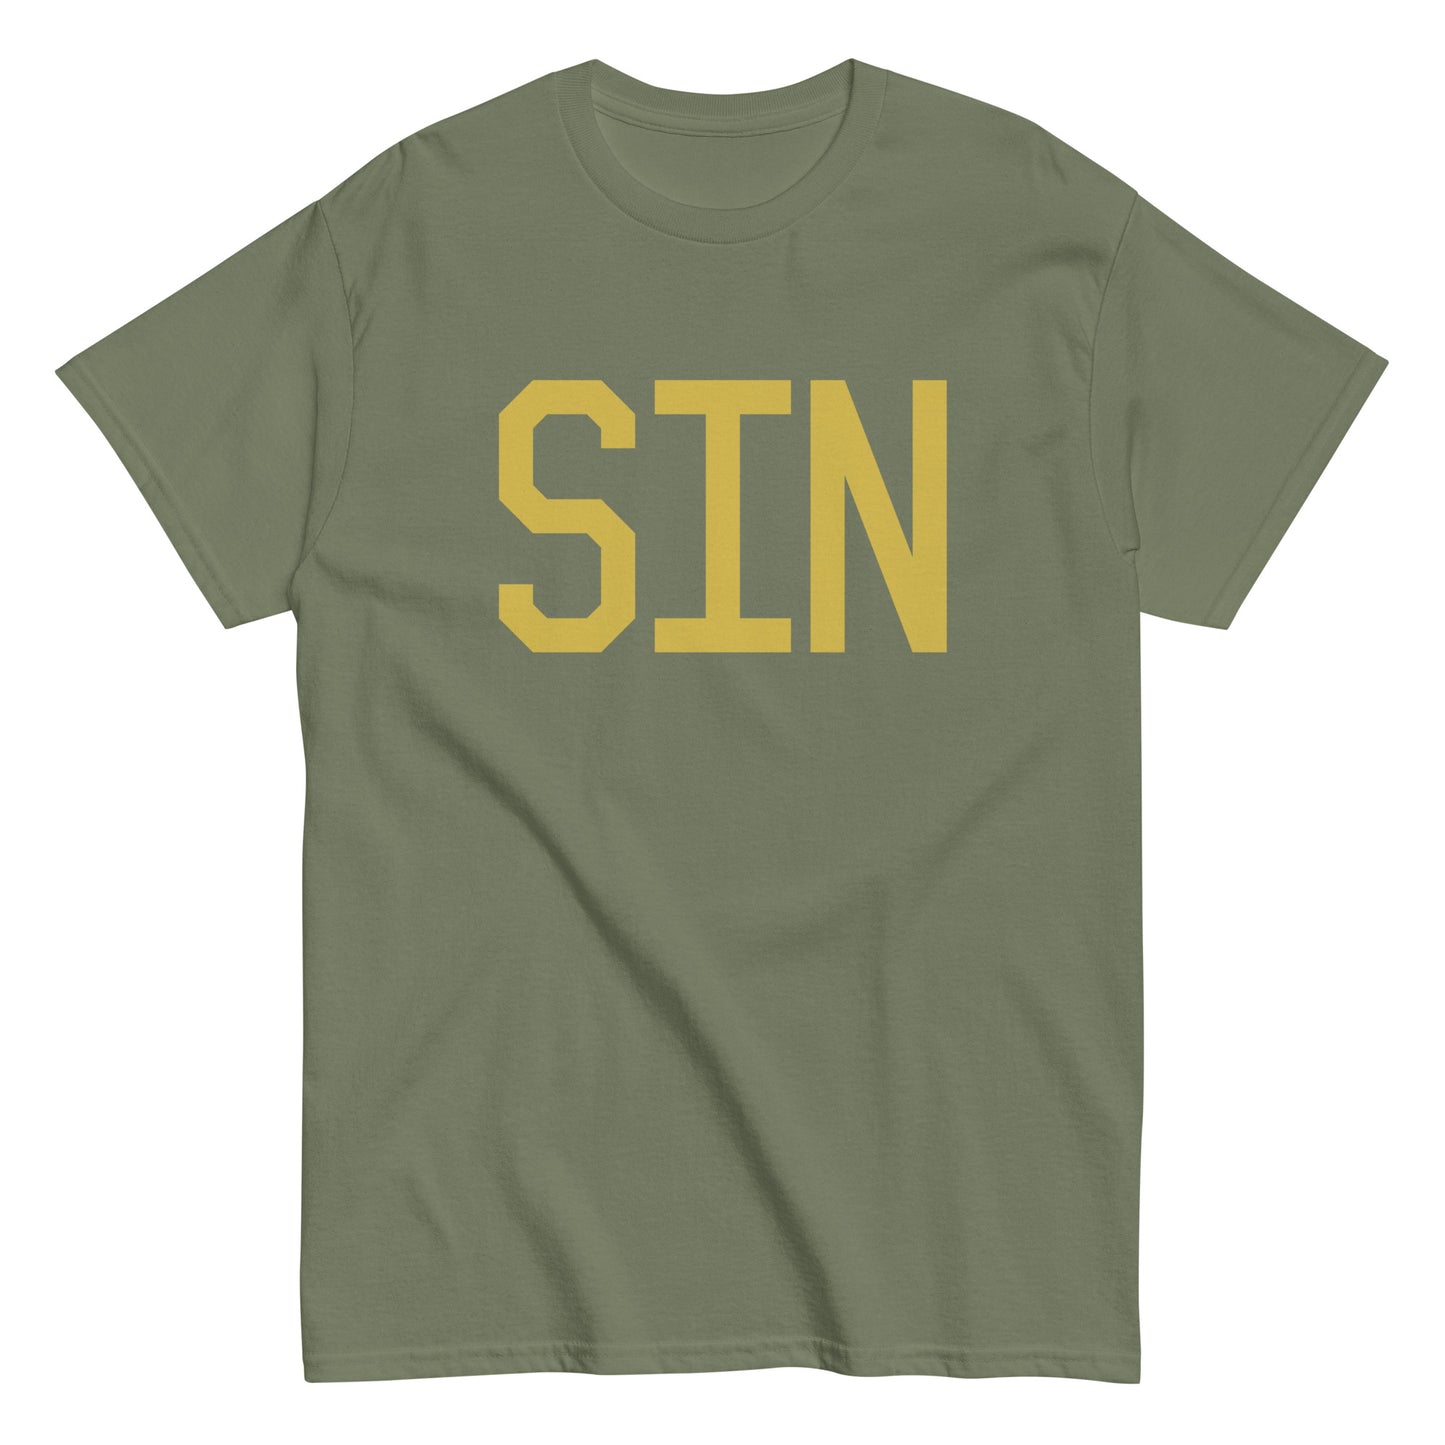 Aviation Enthusiast Men's Tee - Old Gold Graphic • SIN Singapore • YHM Designs - Image 02